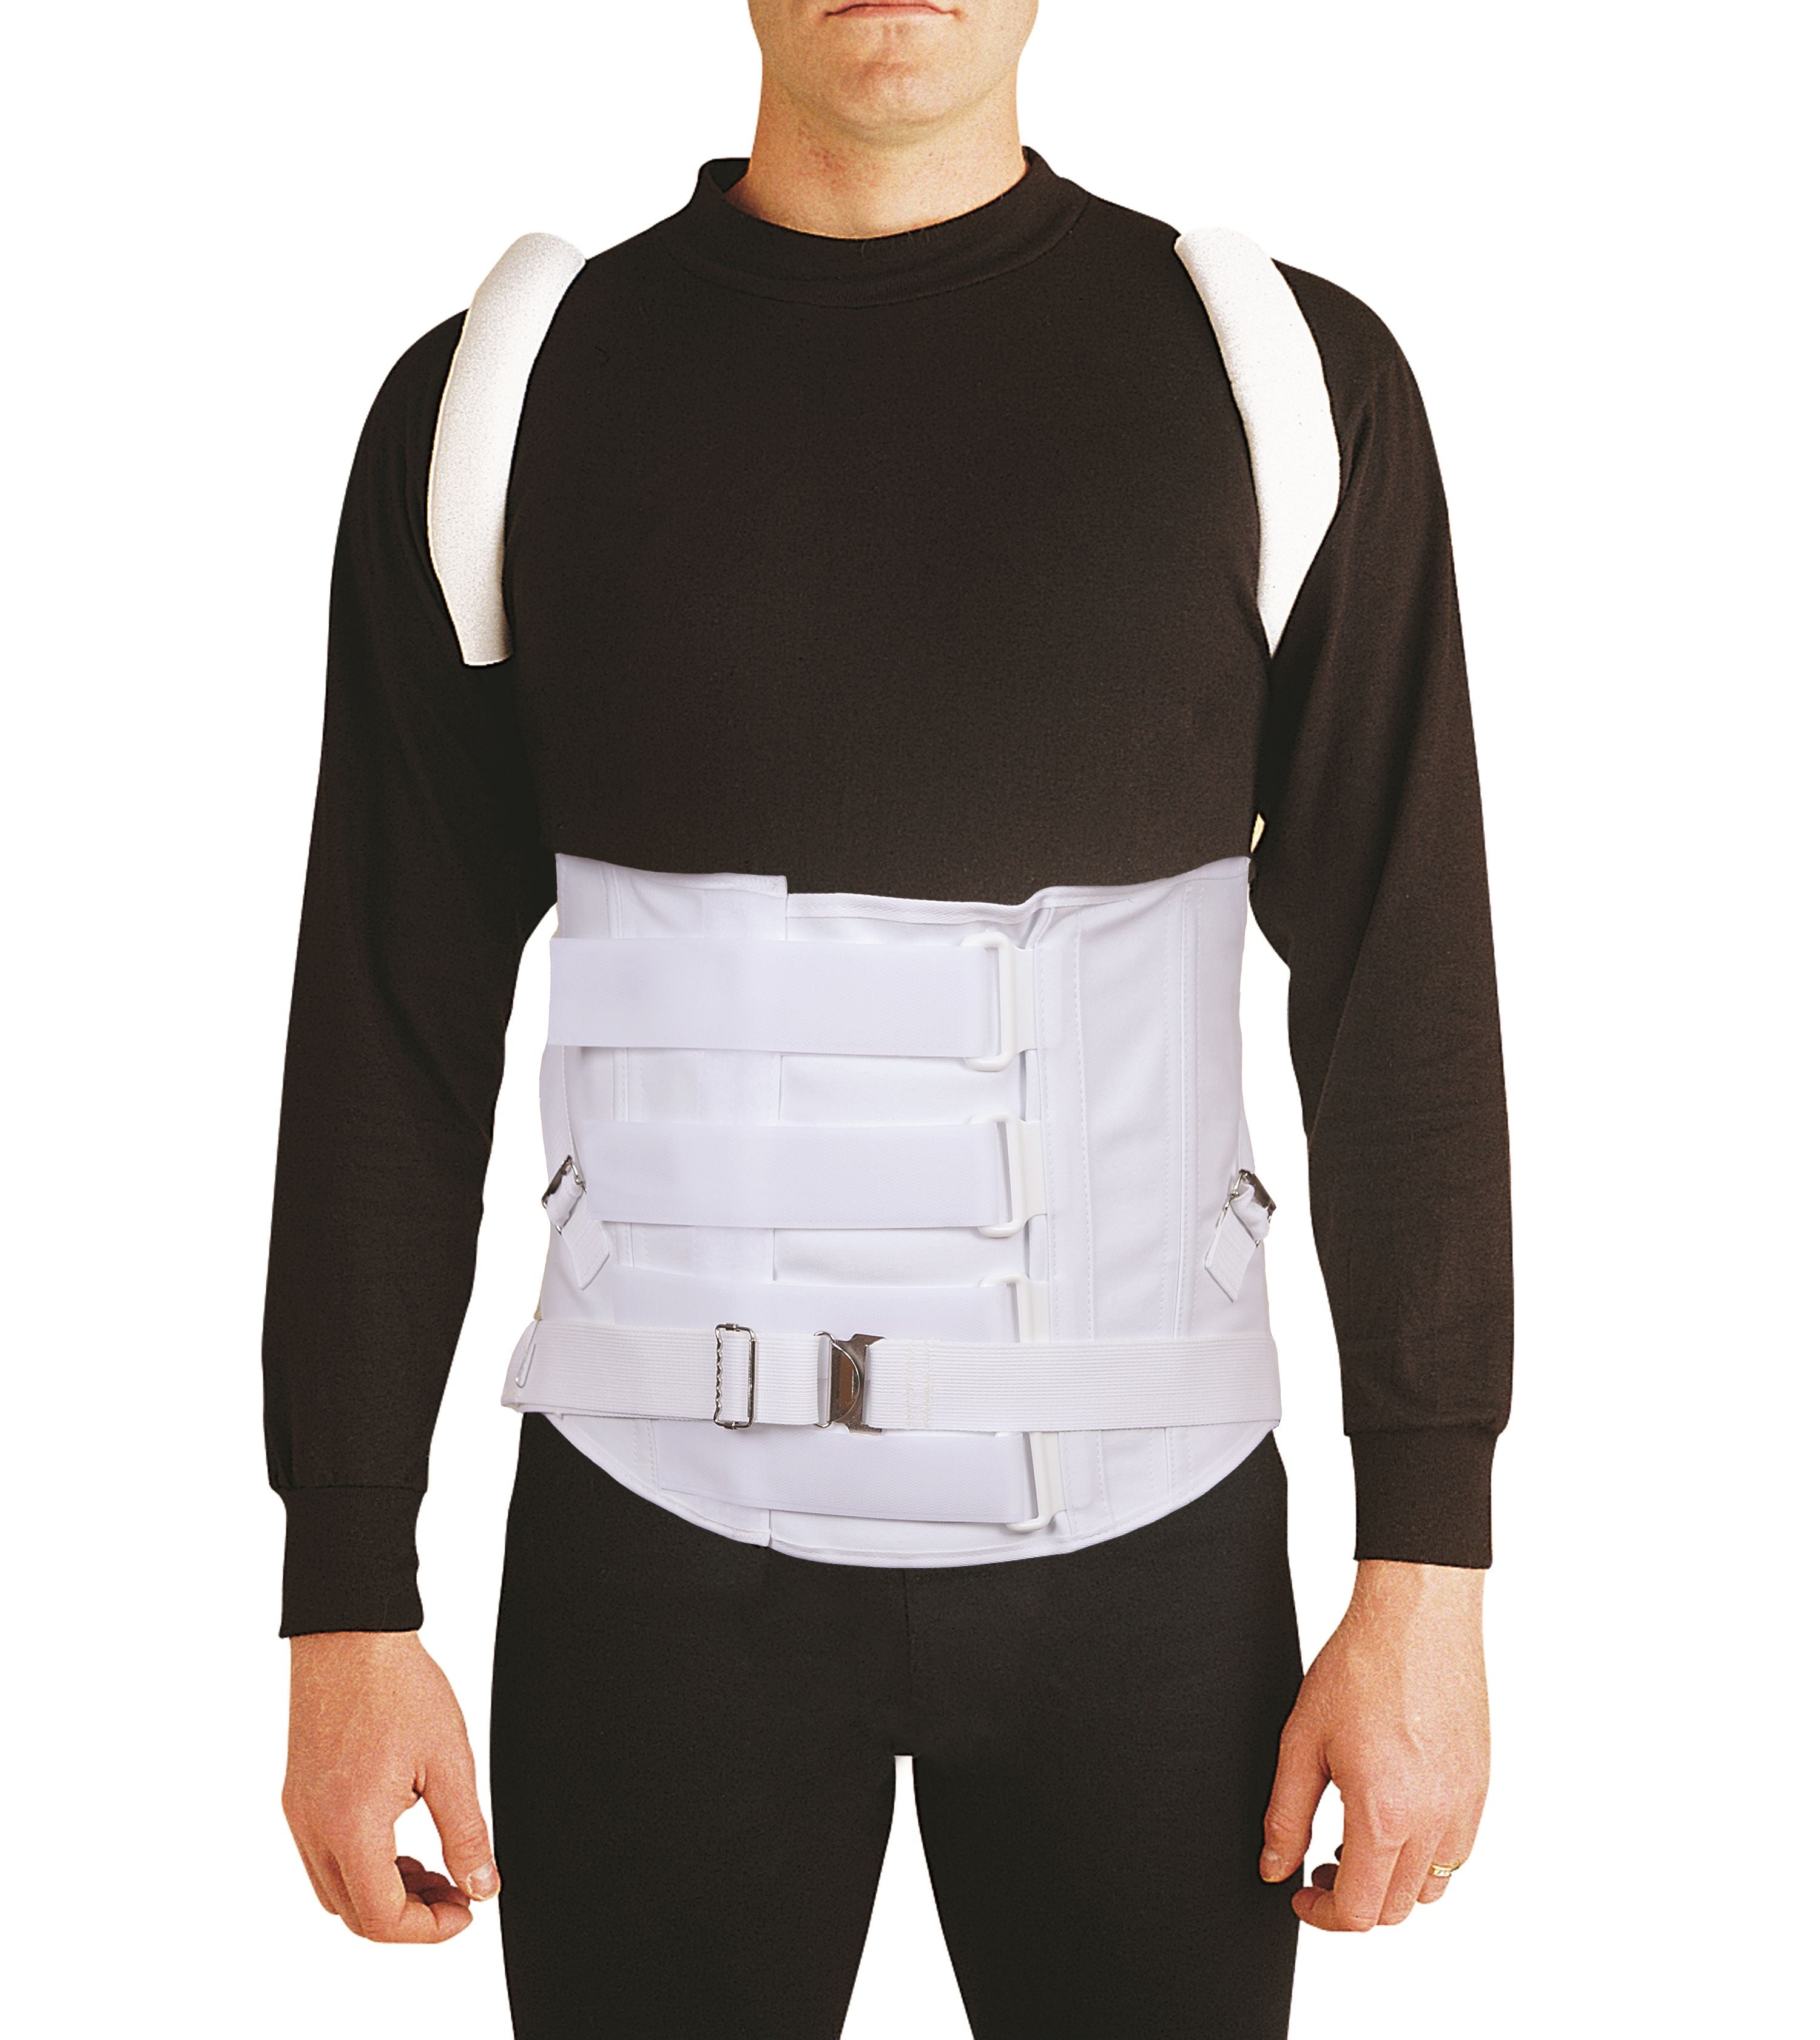 Thoracic Spinal Lumbar Flexion Back Brace - China Tlso, Spinal Brace